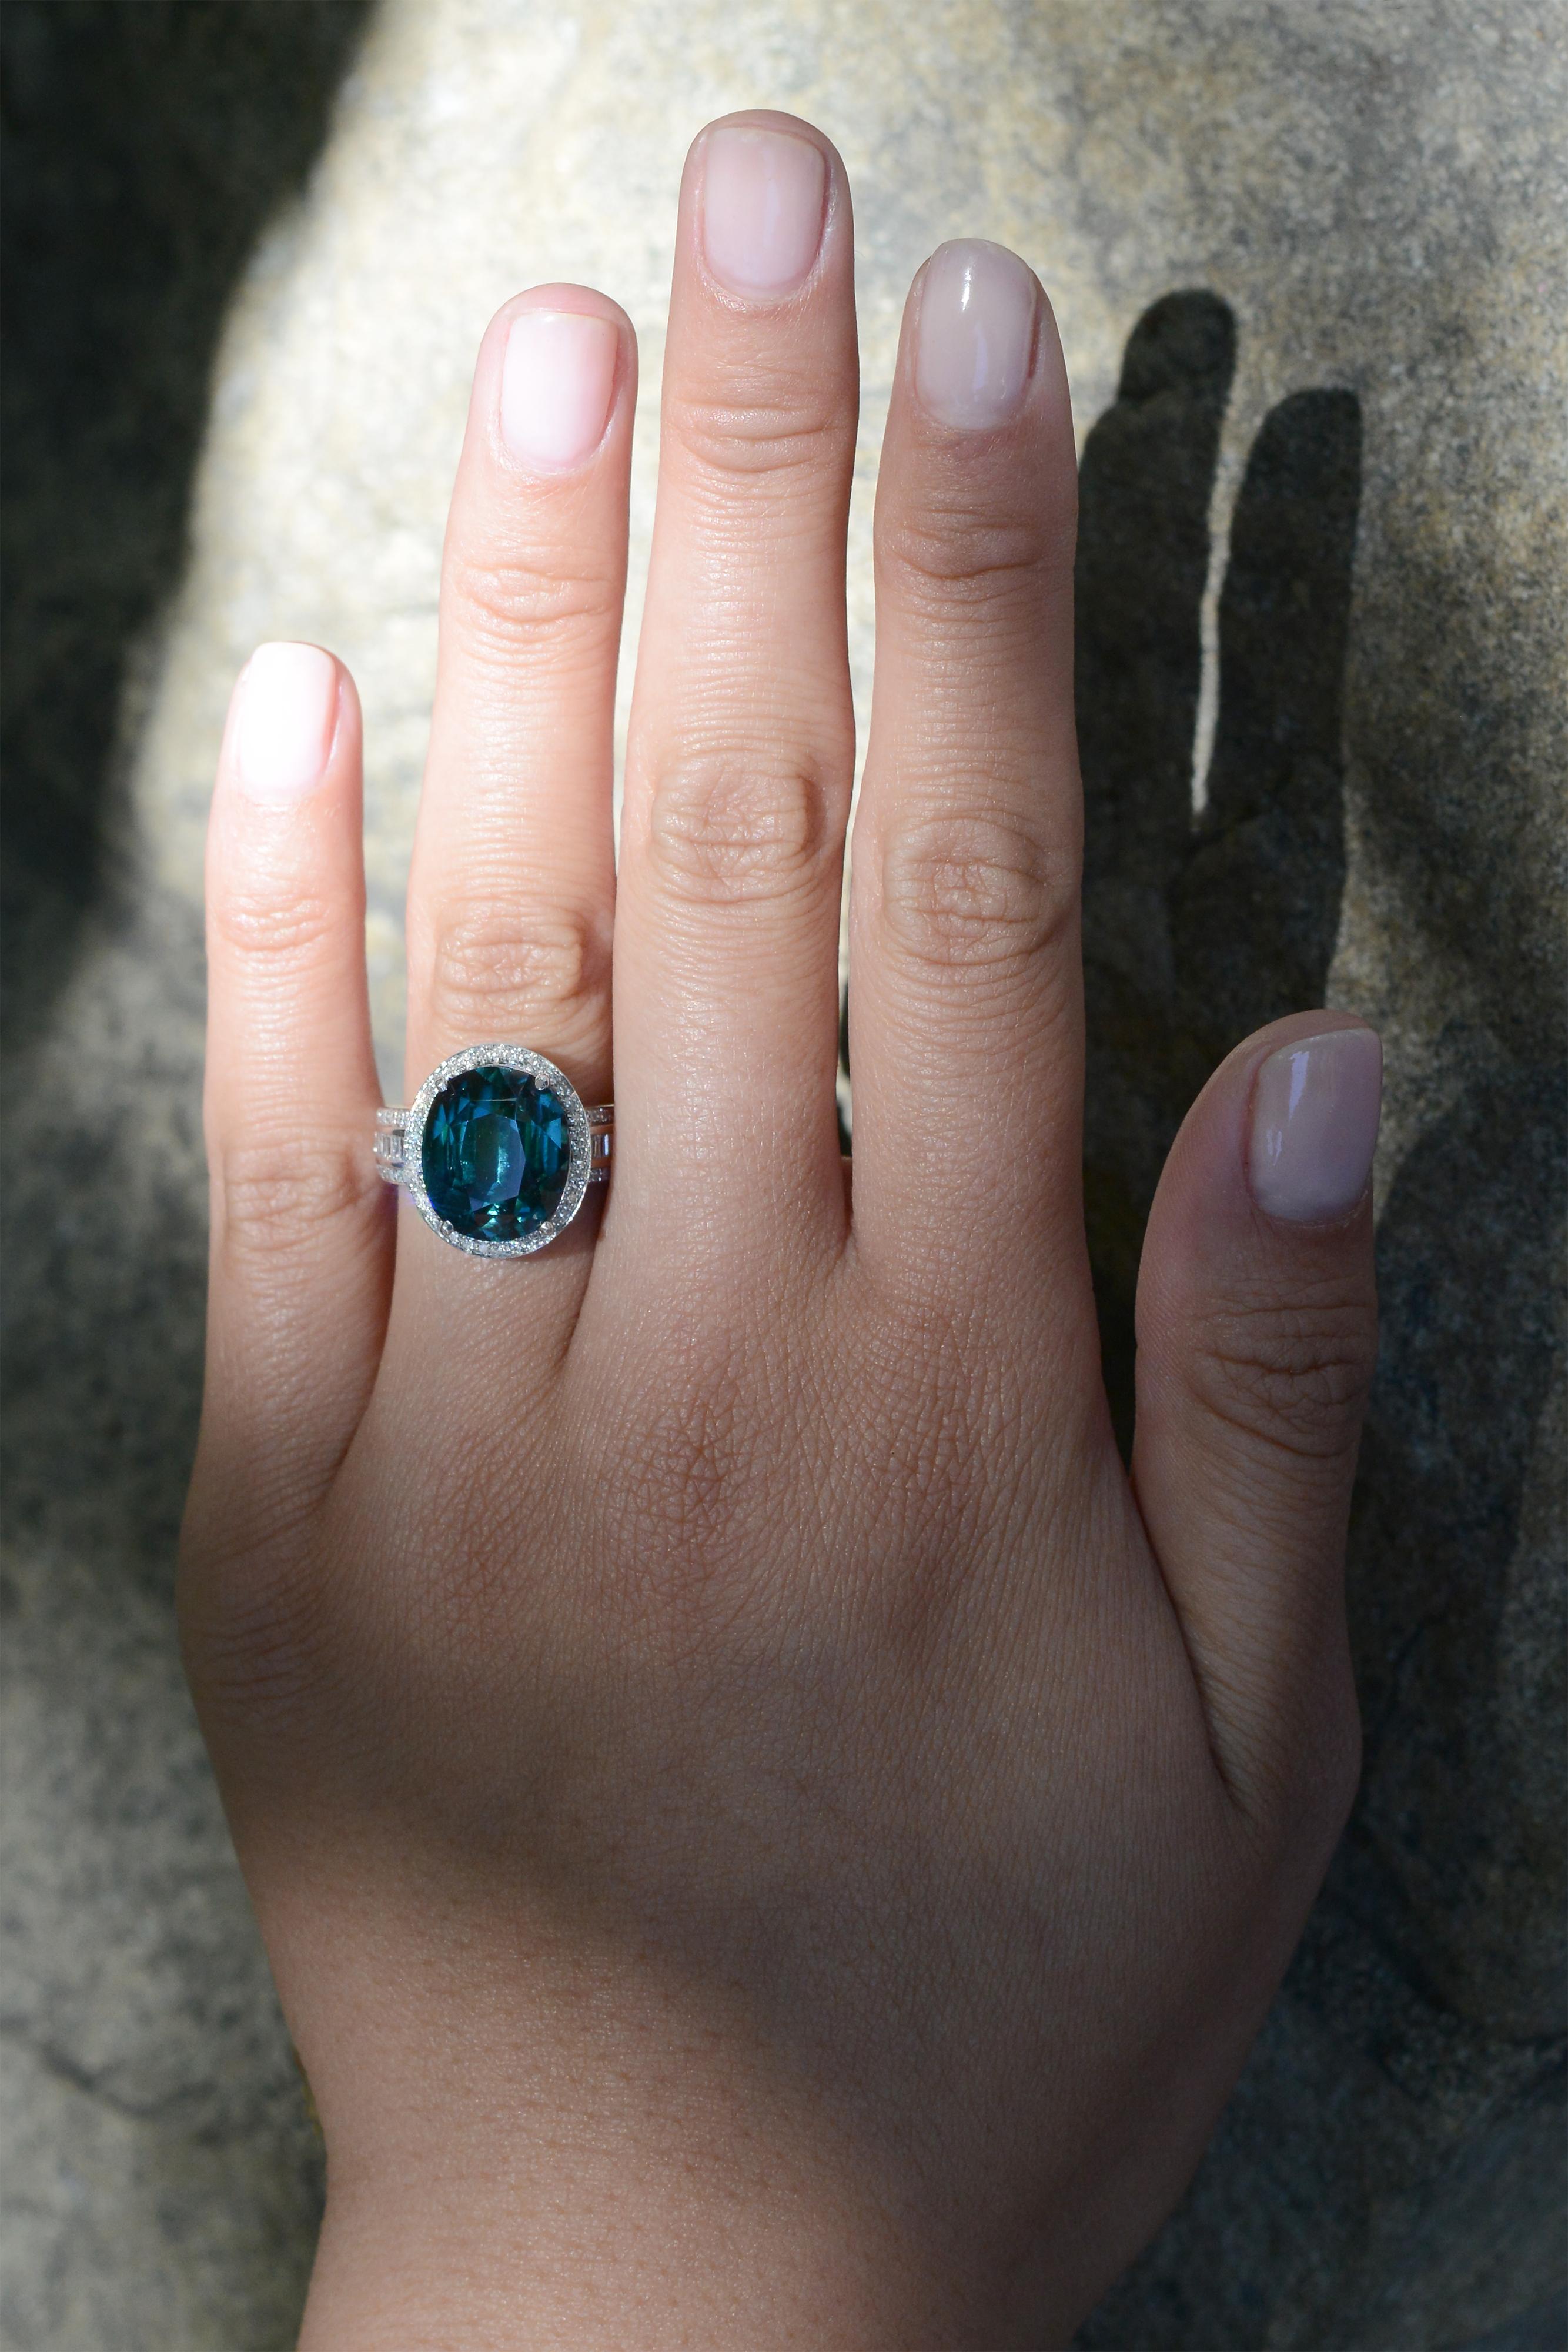 This exquisite estate cocktail ring boasts a treasured 9 carat oval tourmaline oval showcasing an alluring Mediterranean Sea color. Guaranteed to make a classy statement, the natural gemstone is embellished by the white gold and a halo of round